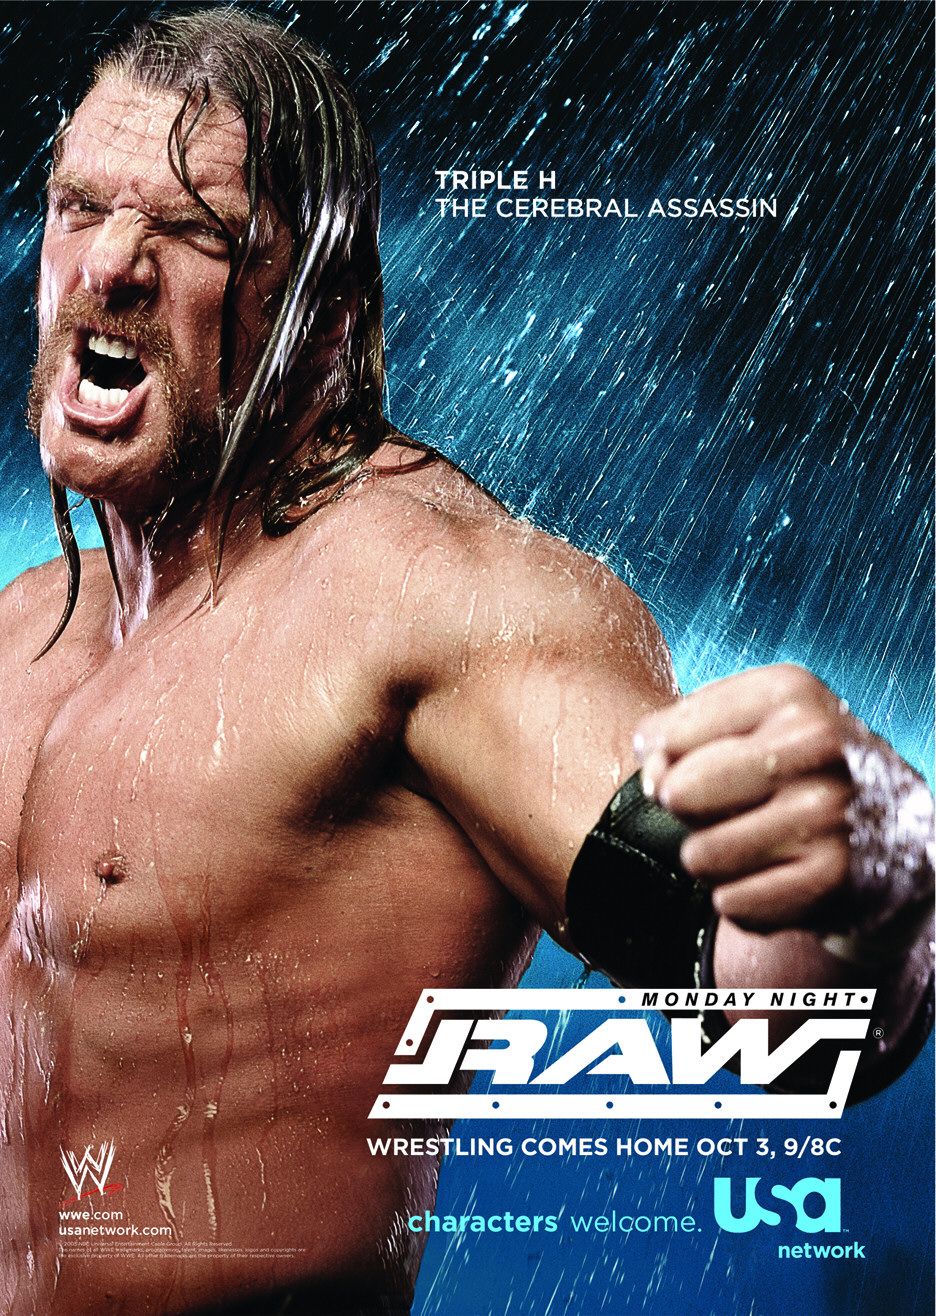 Extra Large TV Poster Image for WWE Monday Night RAW (#2 of 4)